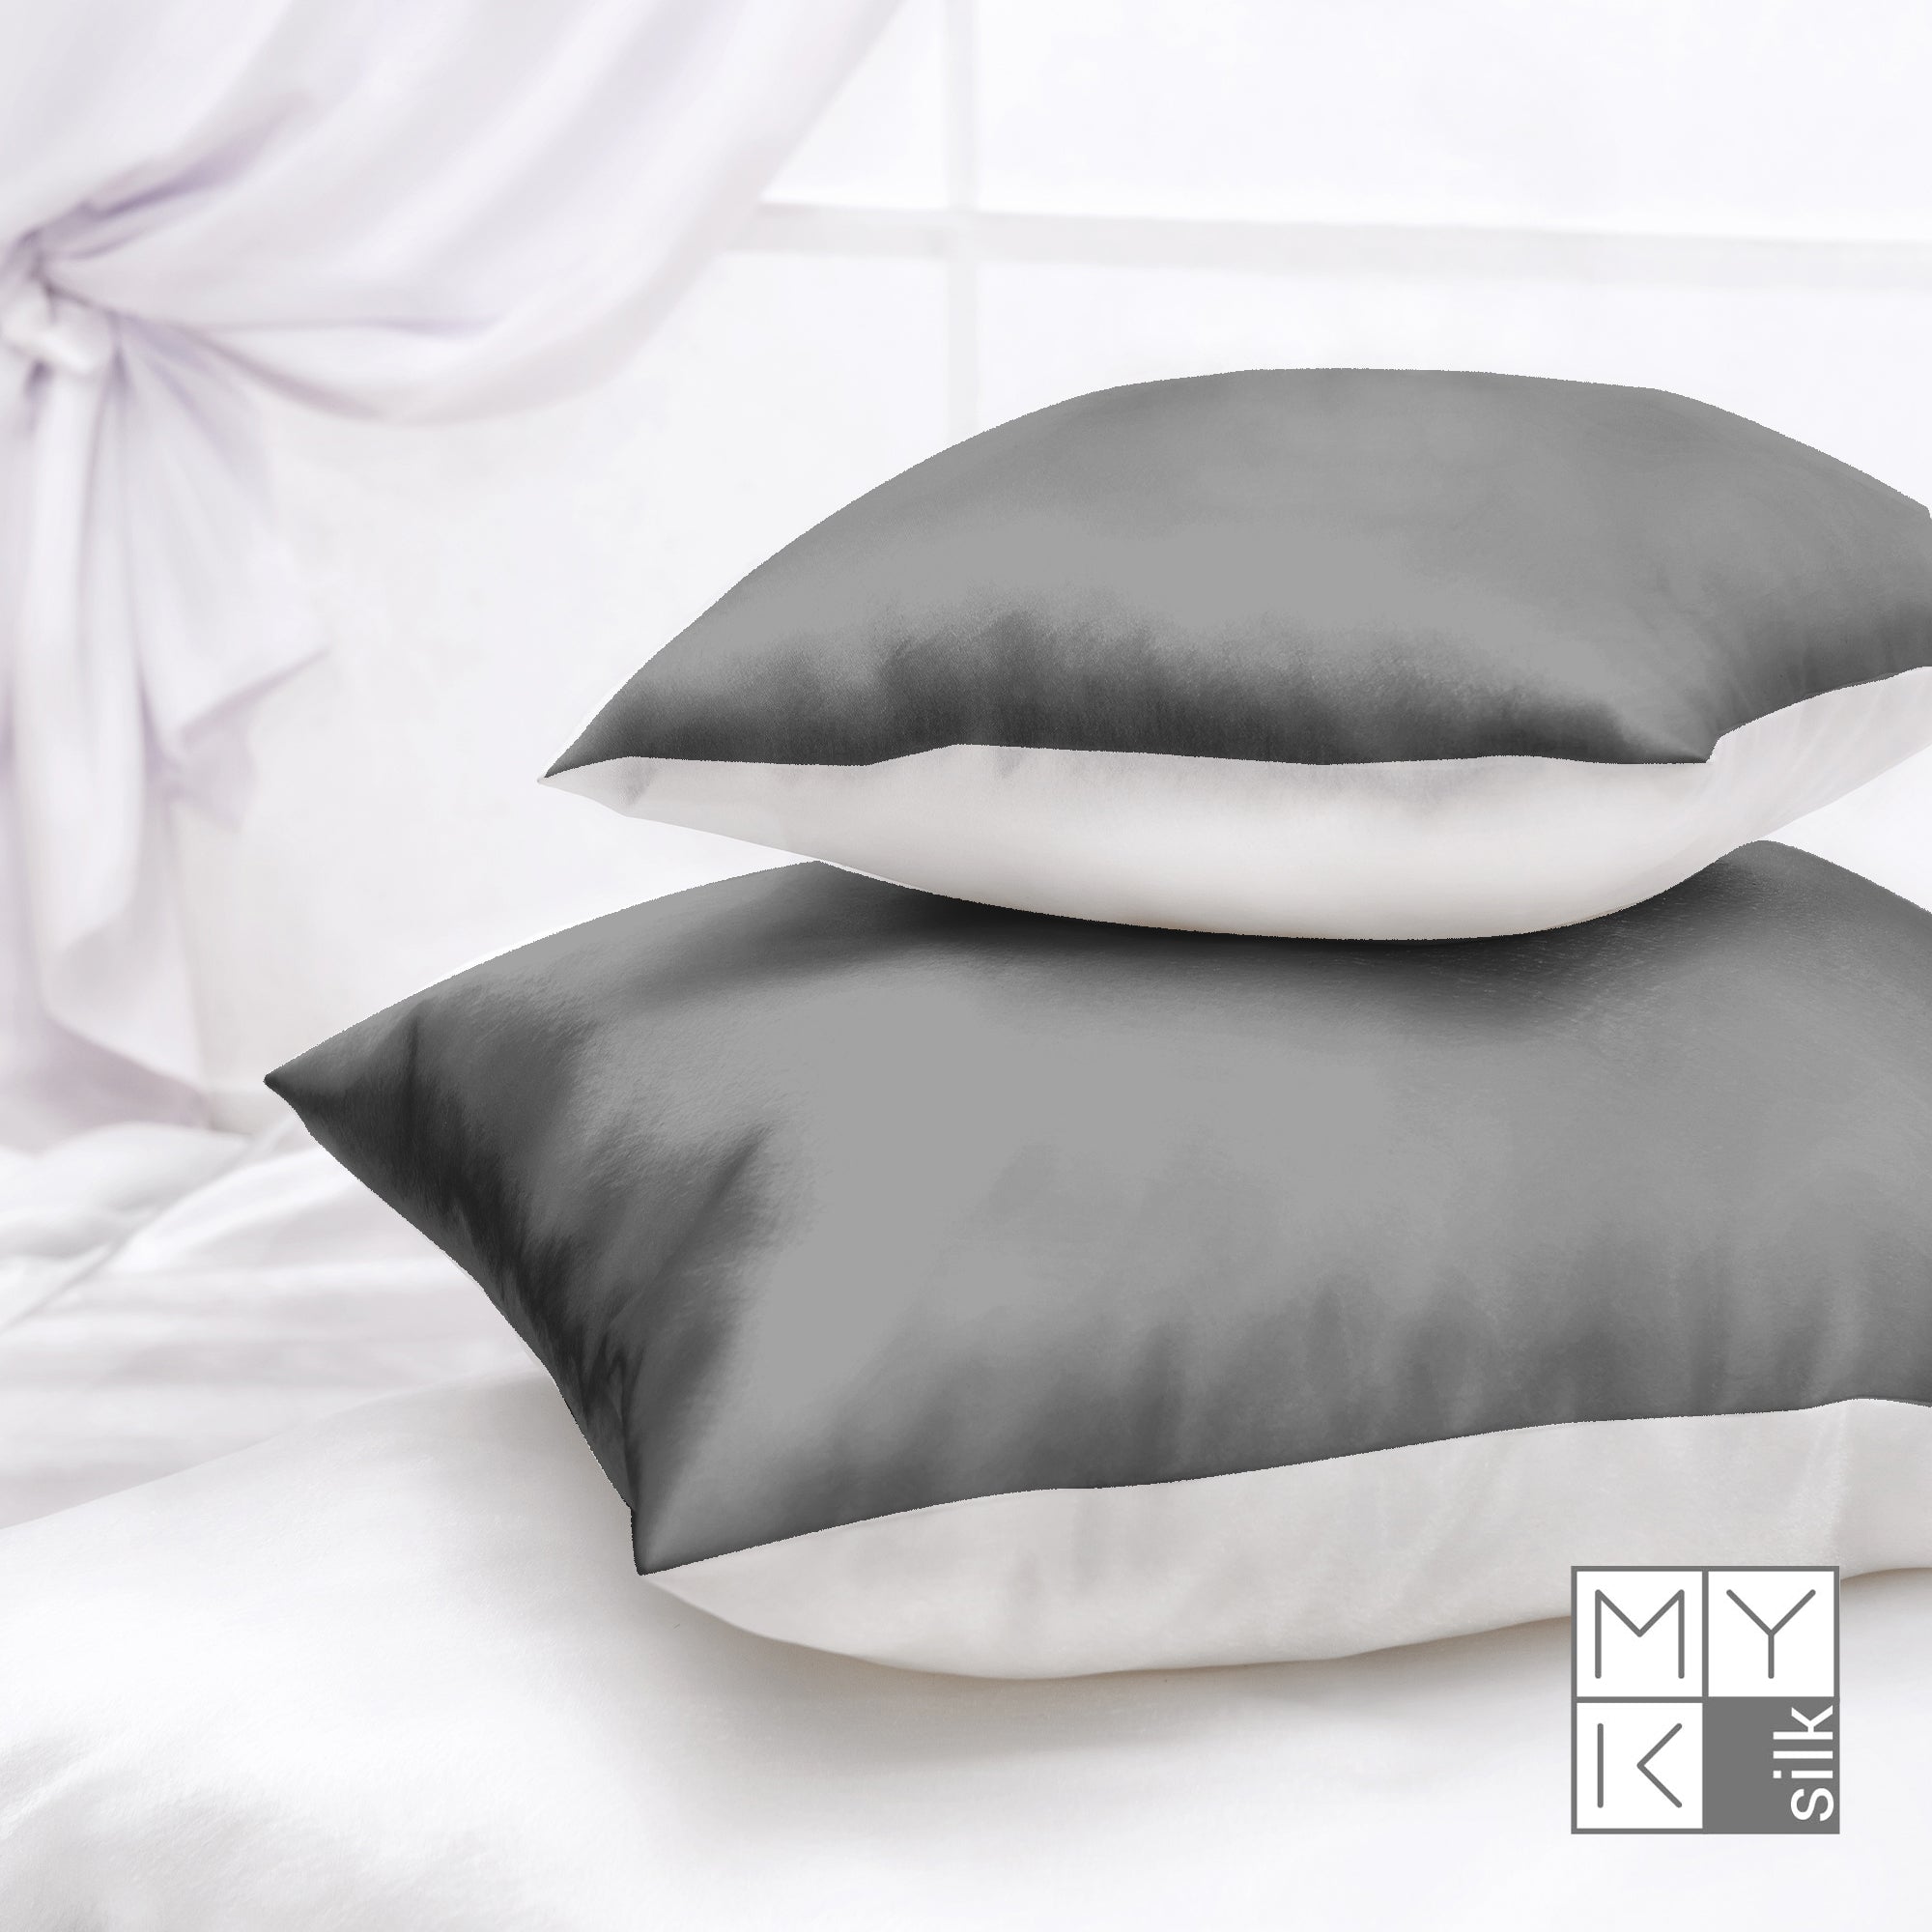 Products Luxury Mulberry Silk Pillowcase with Cotton Underside (25 momme) - MYK Silk #color_charcoal gray